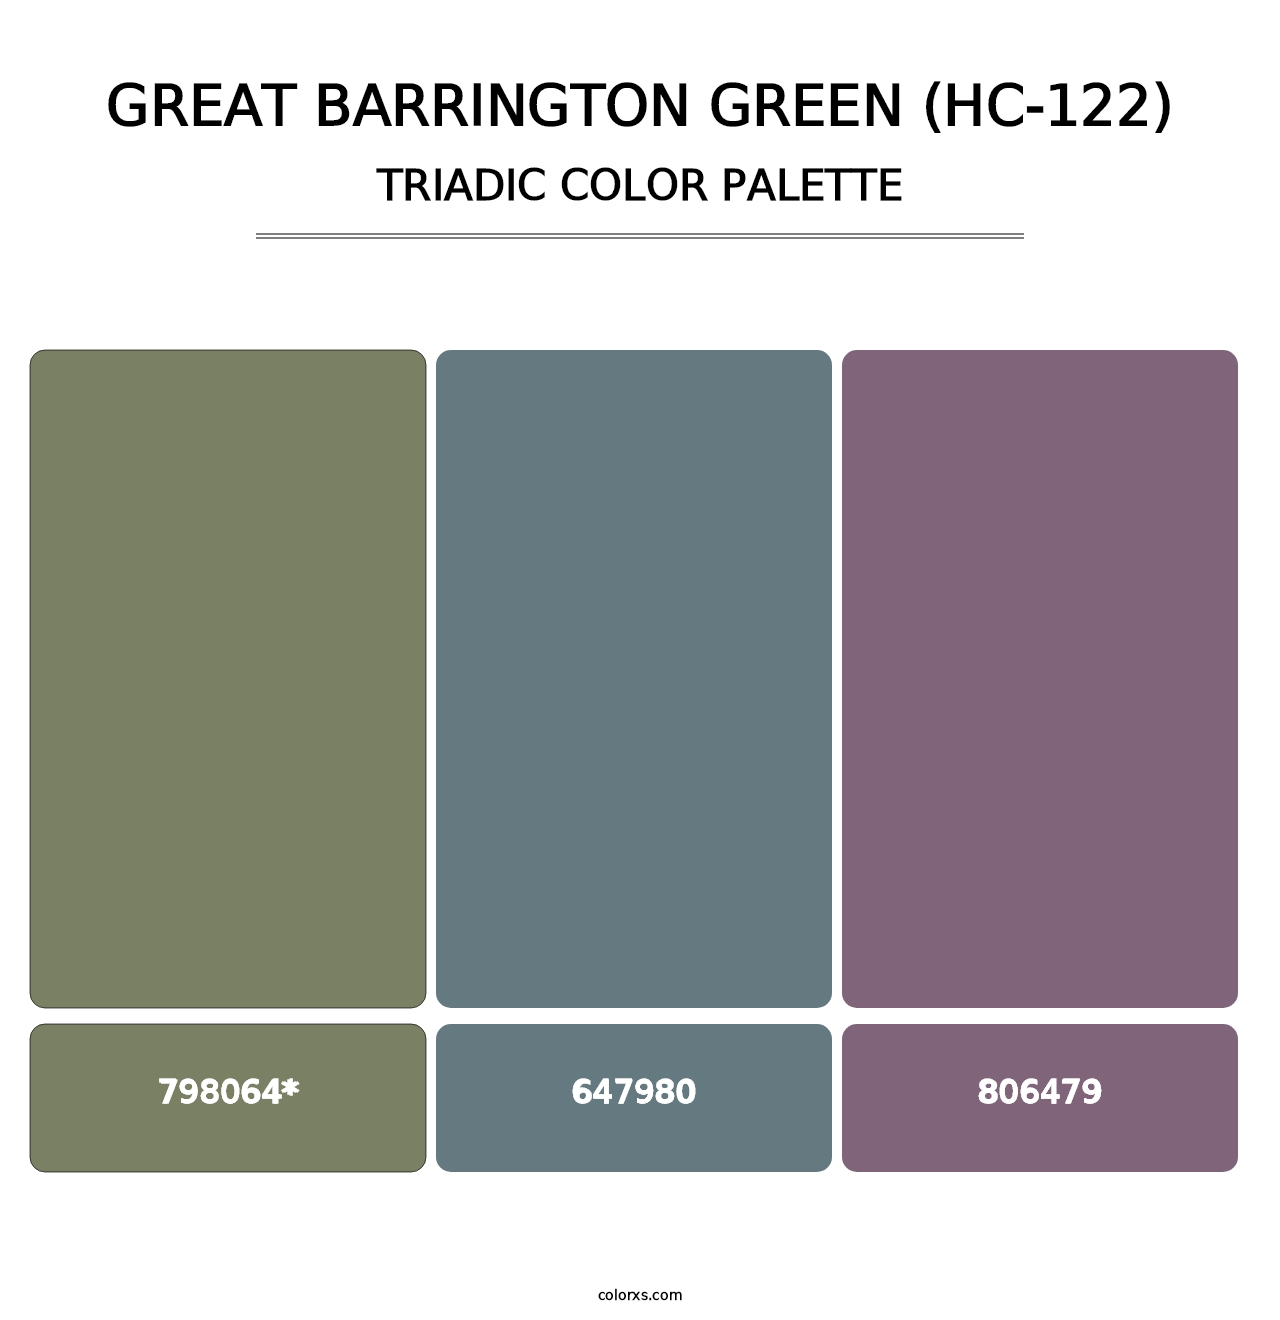 Great Barrington Green (HC-122) - Triadic Color Palette